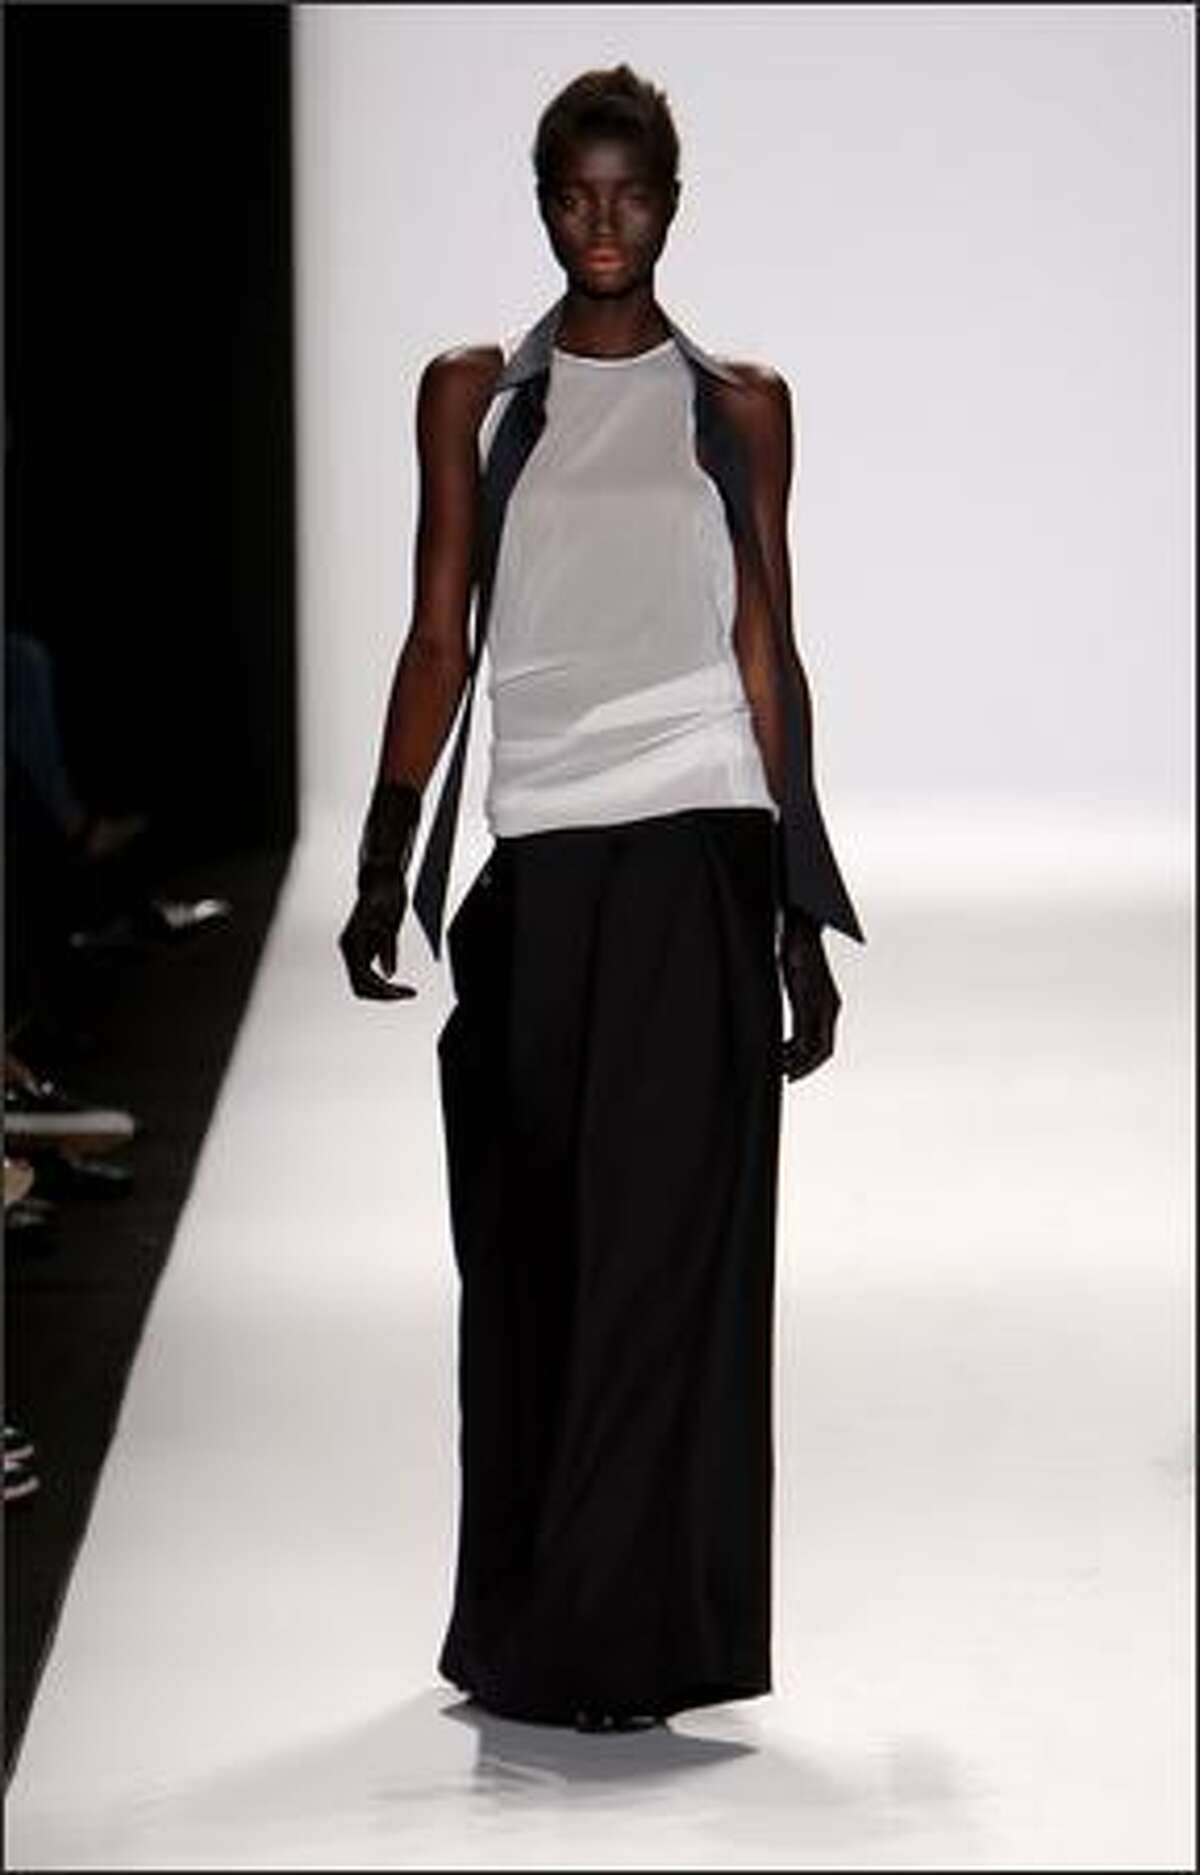 A model walks the runway at the Academy of Art University show.